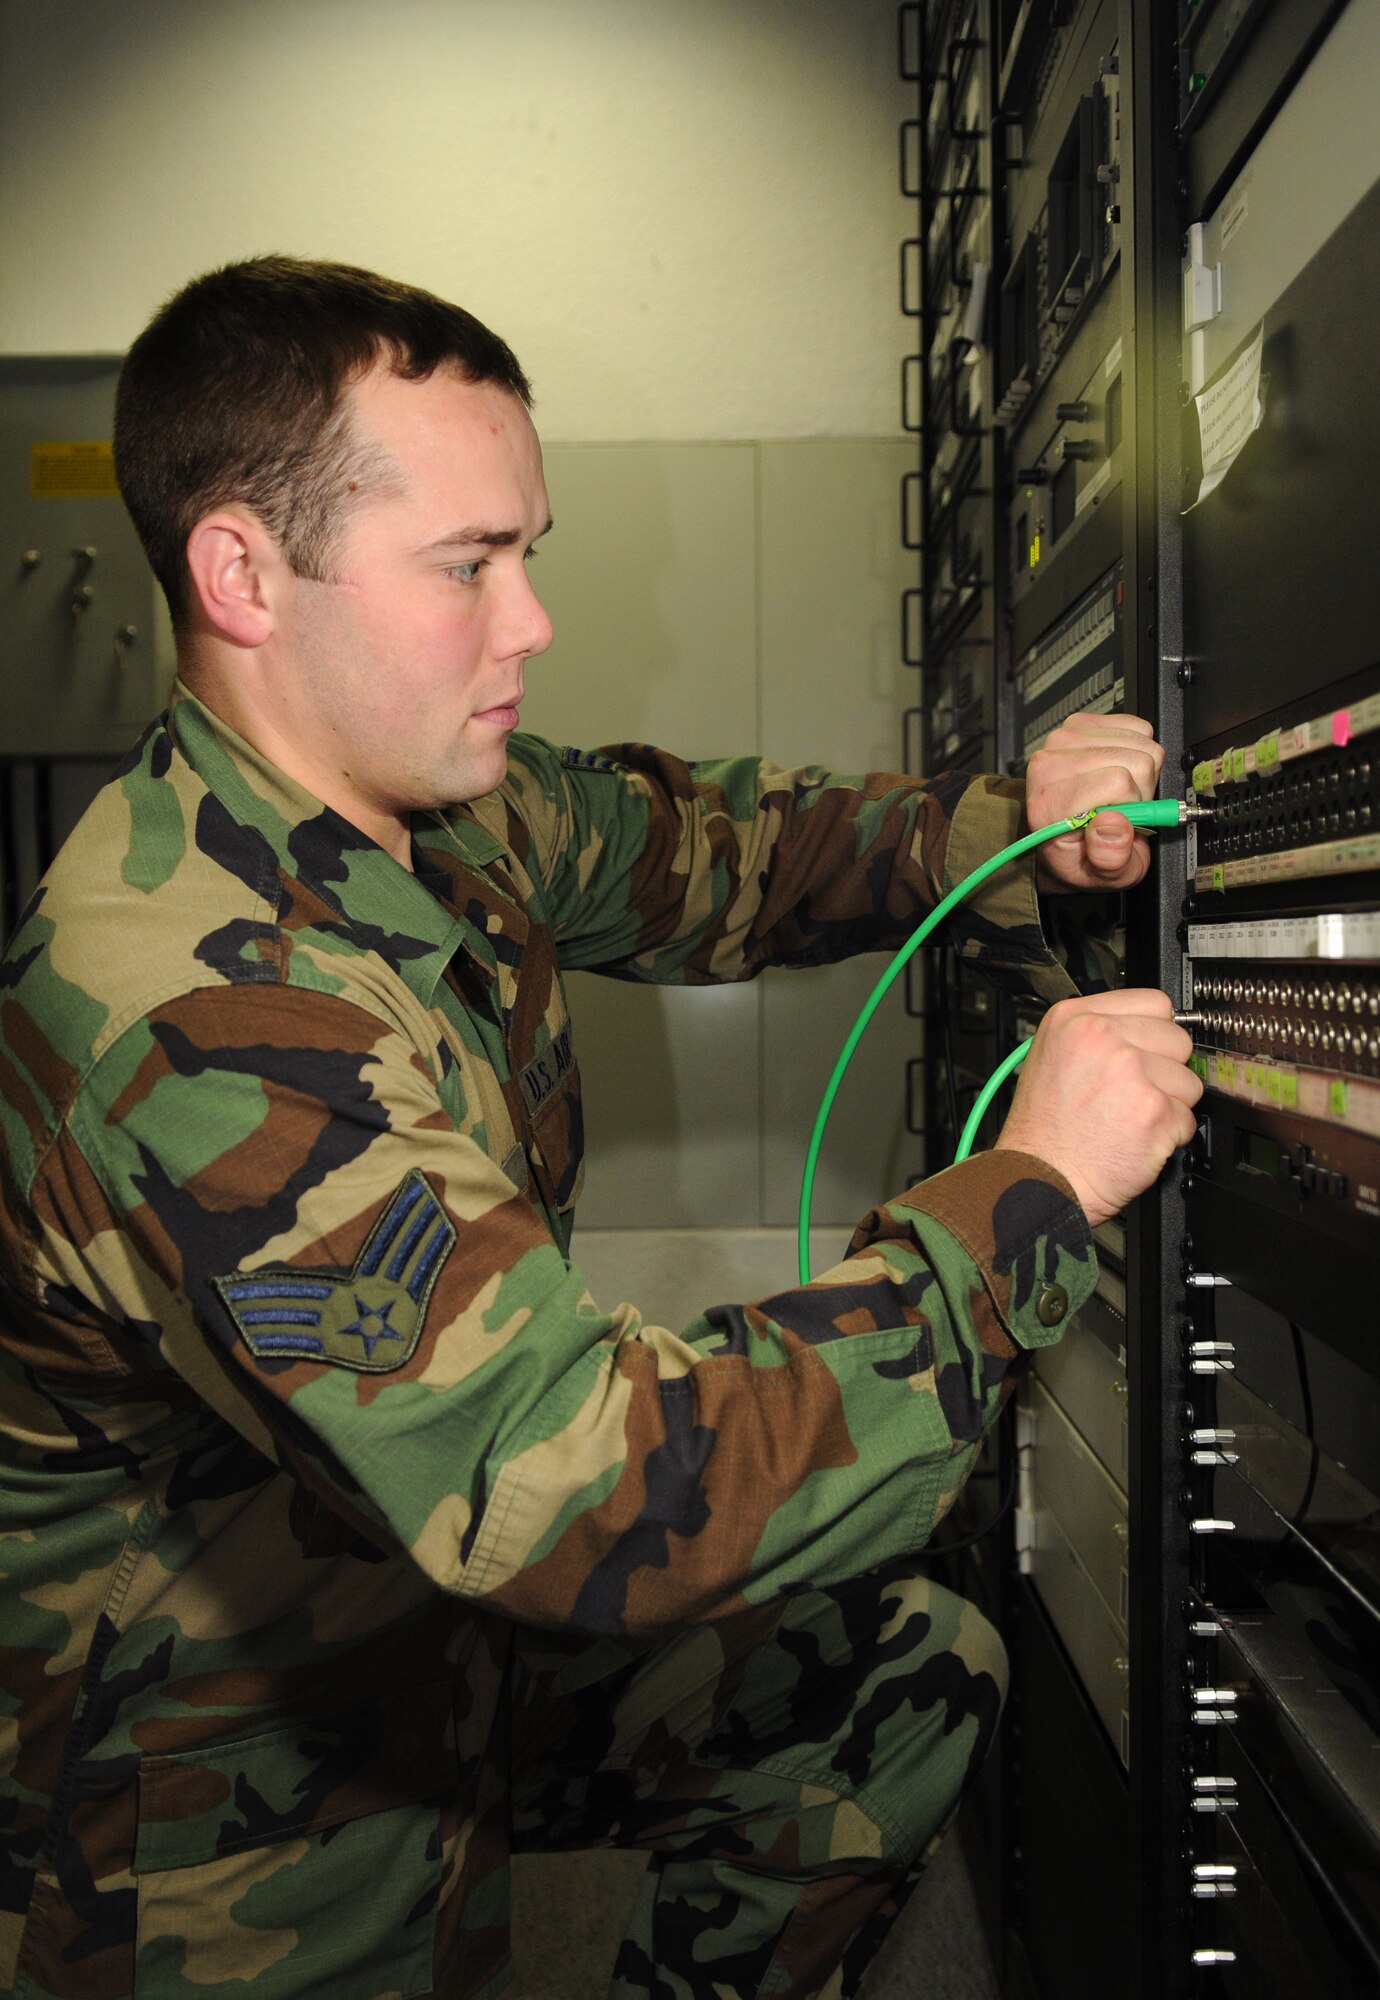 BITBURG ANNEX, Germany -- Senior Airman Jacob Cooney, American Forces Network Spangdahlem broadcast maintenance technician, patches video here Nov. 12. Airman Cooney ensures the television and radio broadcasts work properly to keep members of Team Eifel informed and entertained. (U.S. Air Force photo/Airman 1st Class Nathanael Callon)